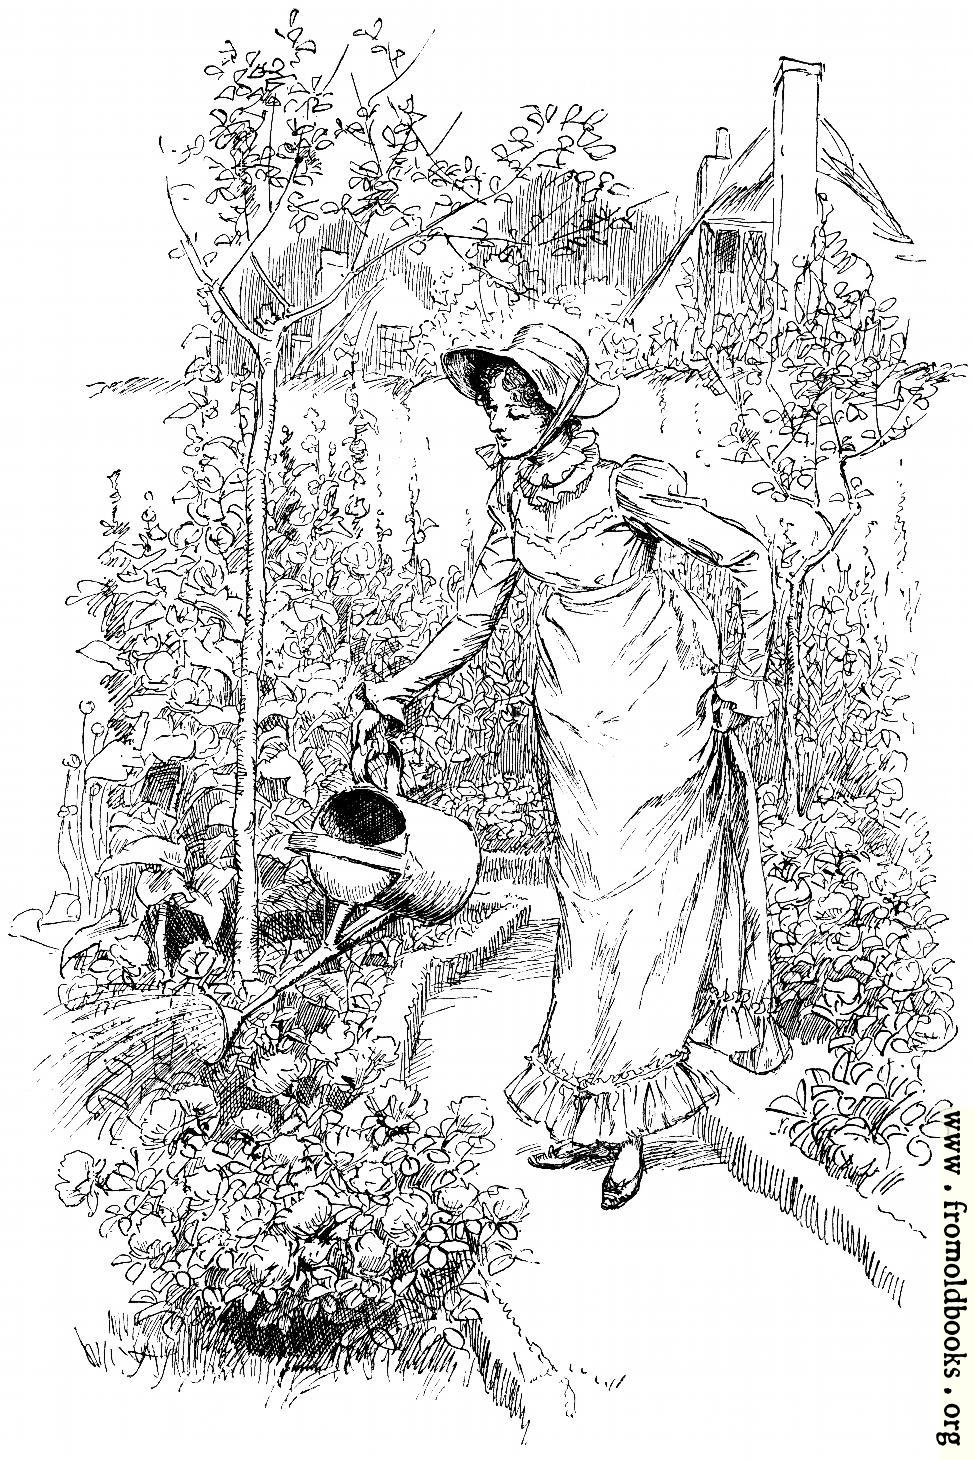 [Picture: Frontispiece: Watering My Flowers]